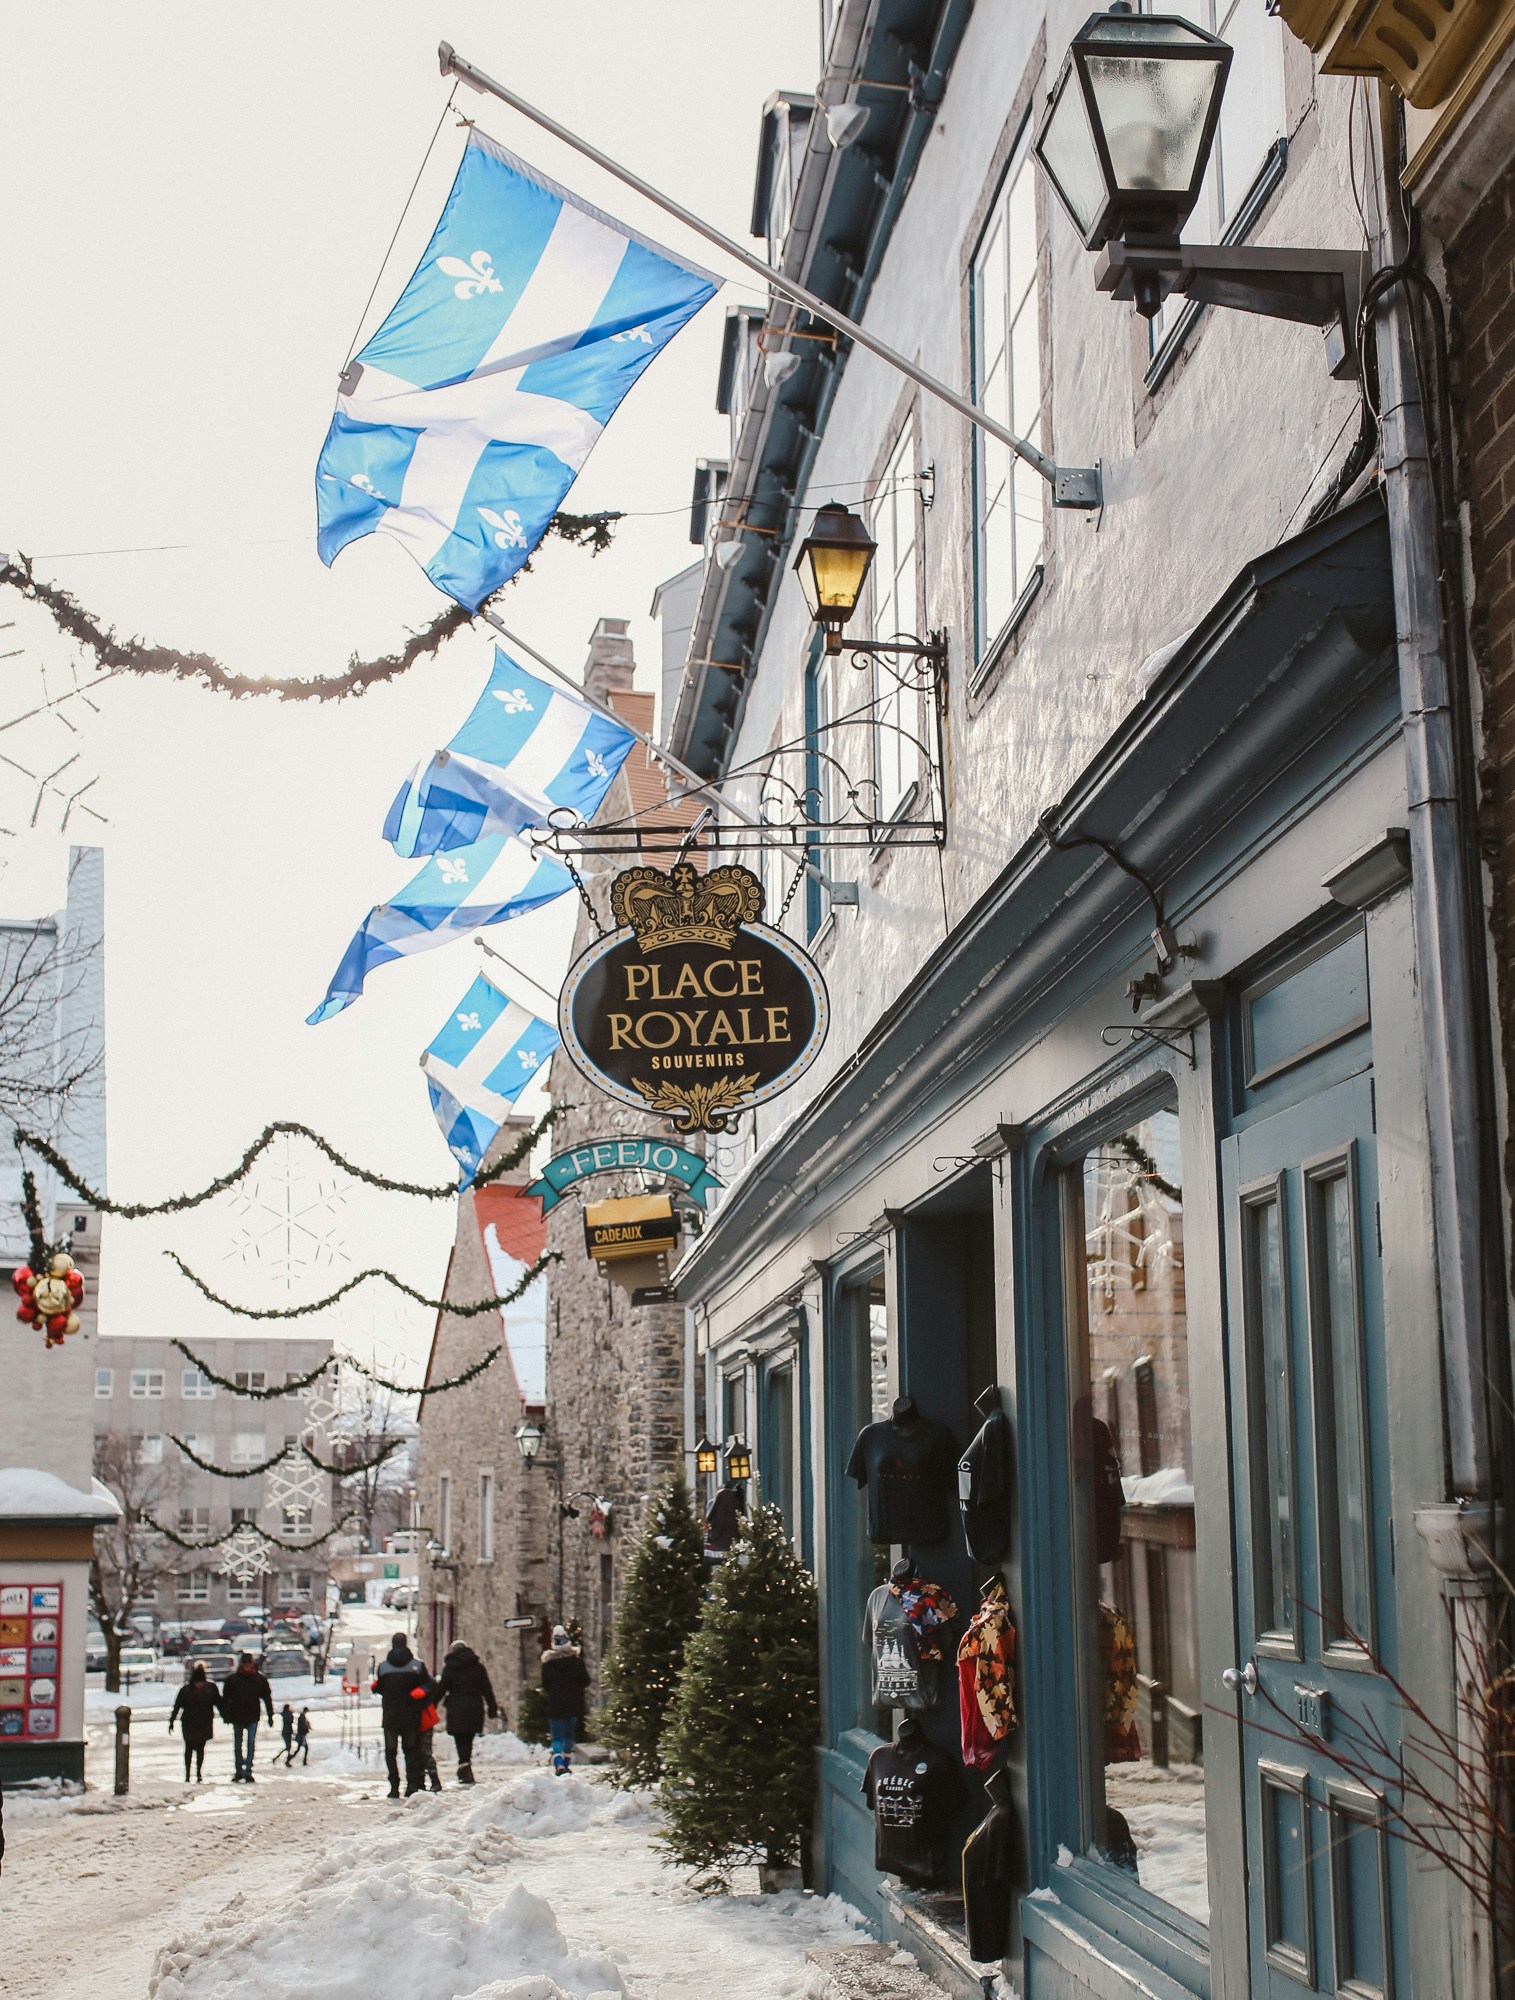 Quartier Petit Champlain in Quebec City is home to charming shops, restaurants and boutique hotels. See why it's at the top of my list as the top 10 things to do in Quebec City in winter.